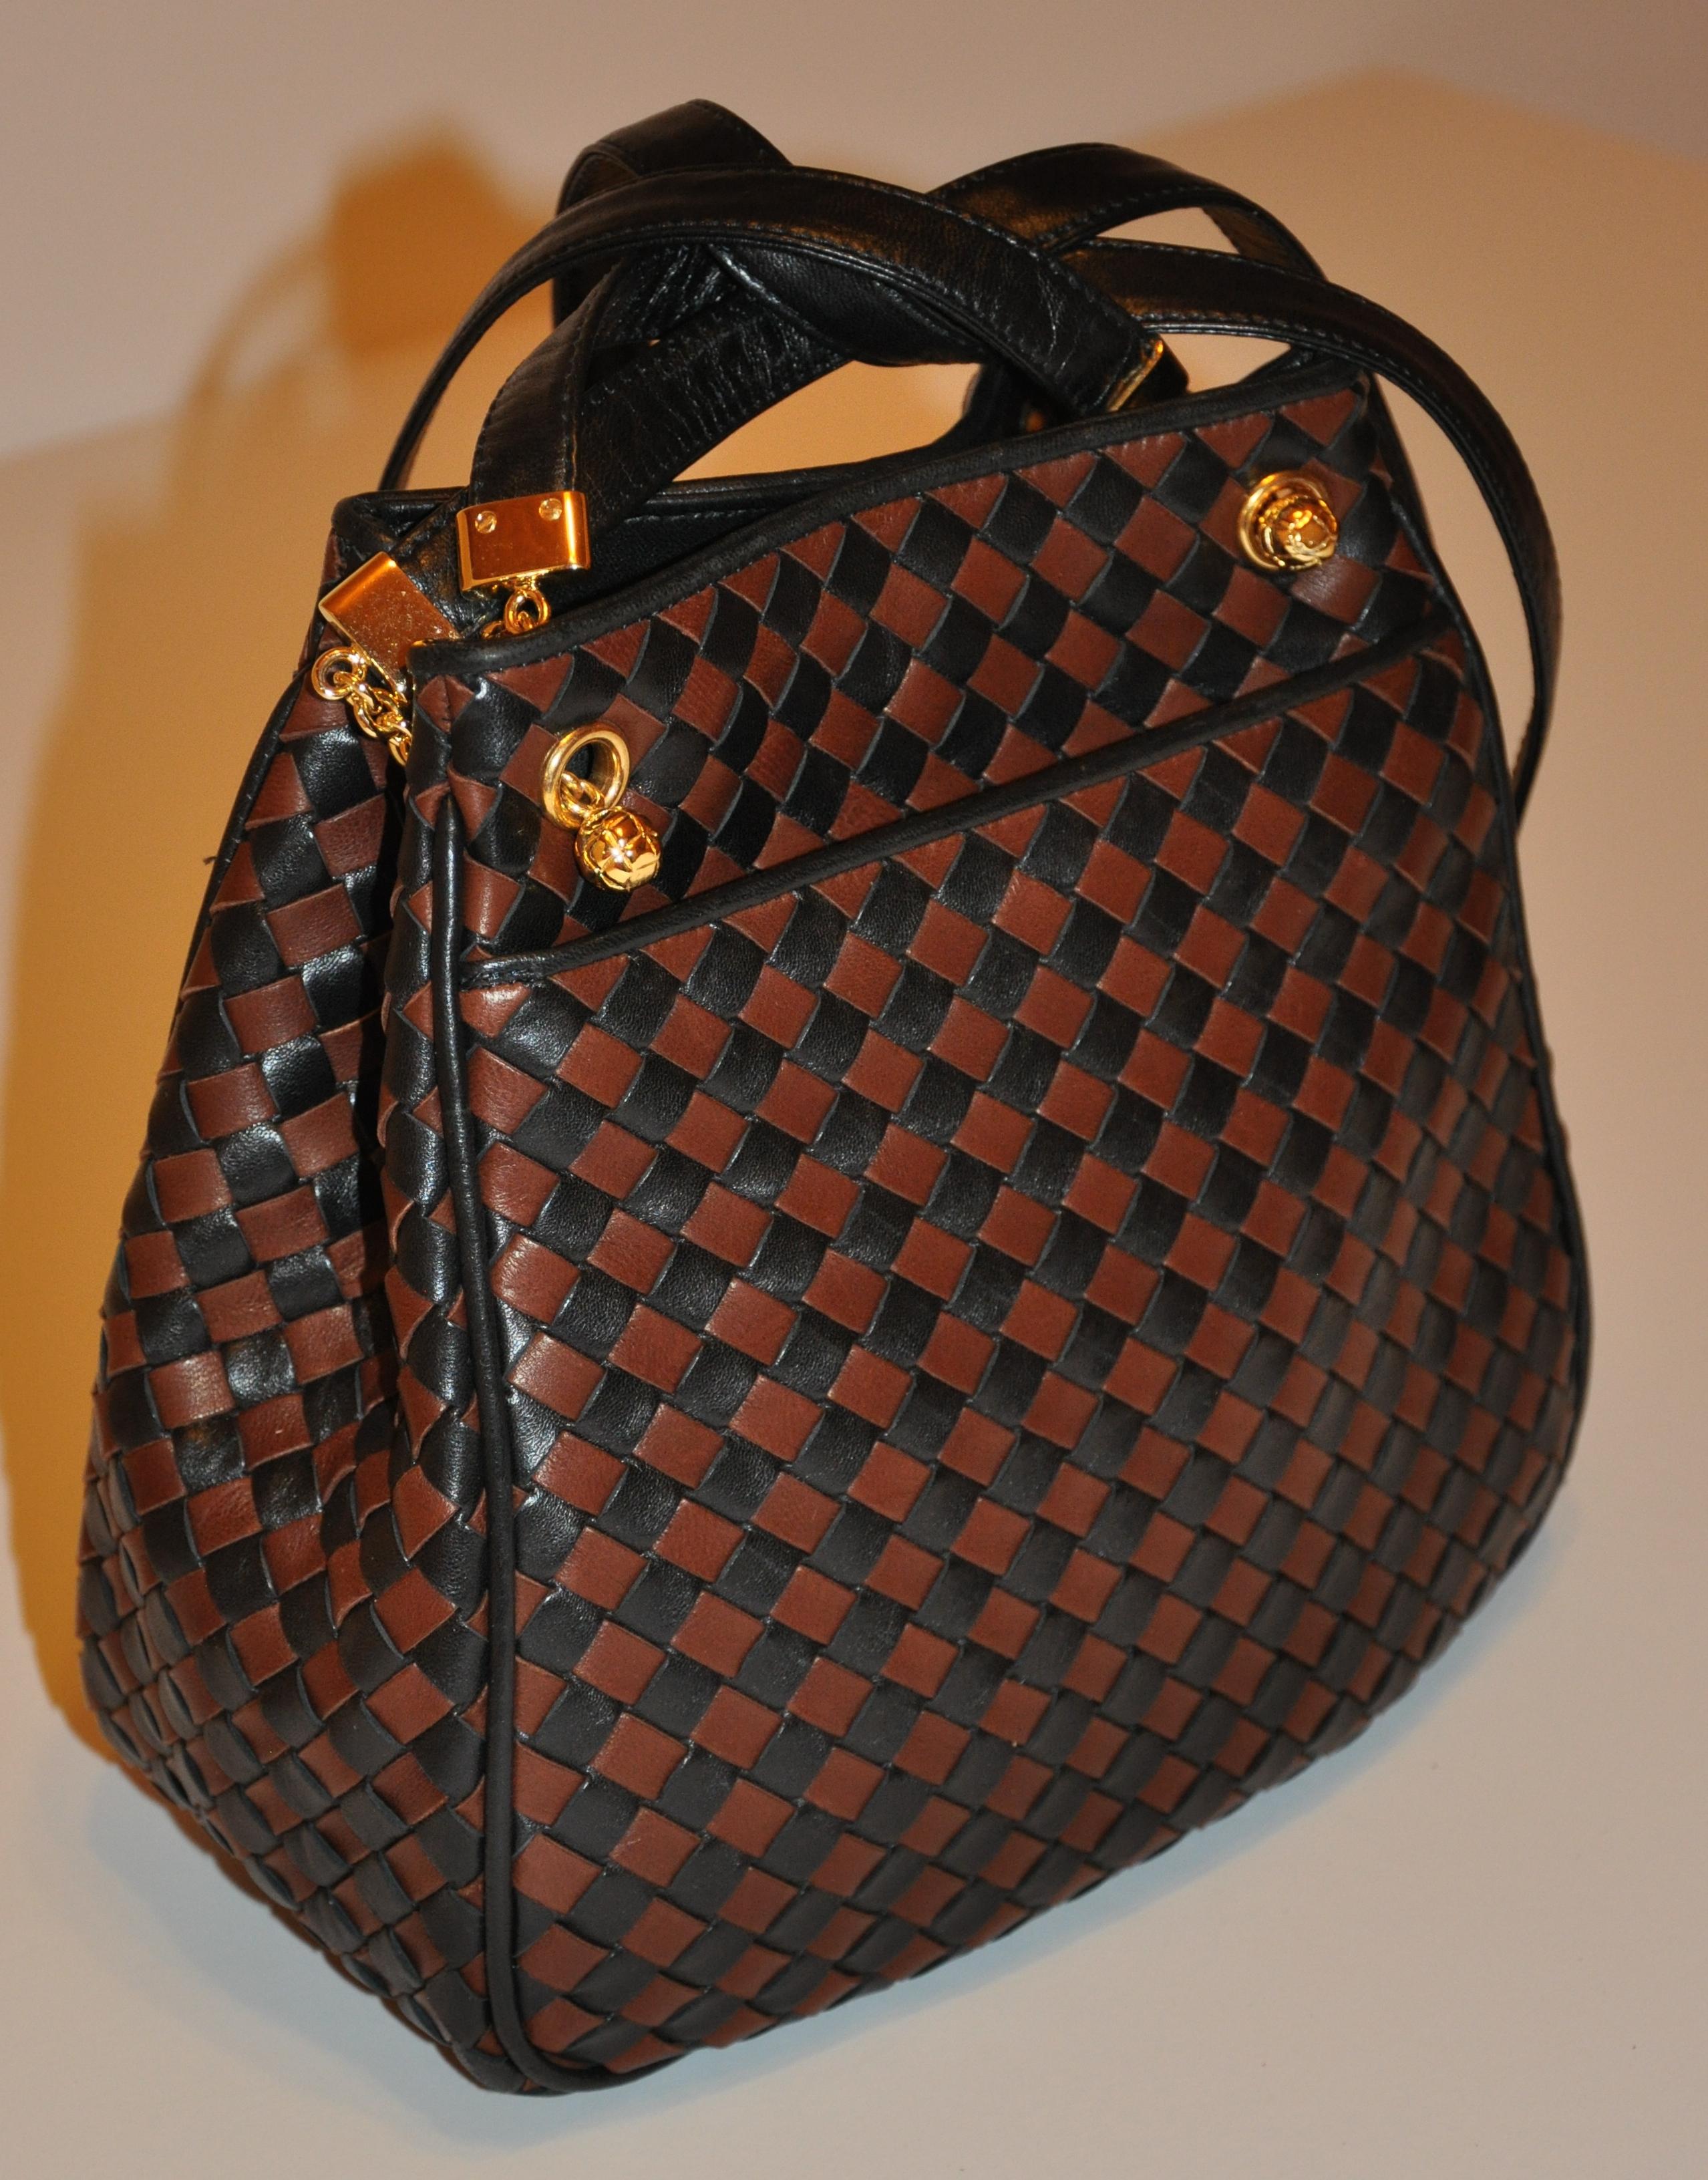        Bottega Veneta wonderfully detailed Coco-brown & black signature woven lambskin double-strap shoulder bag is accented with lambskin piping throughout. The exterior of the bag has a open compartment for optional use. Bag is highlighted with